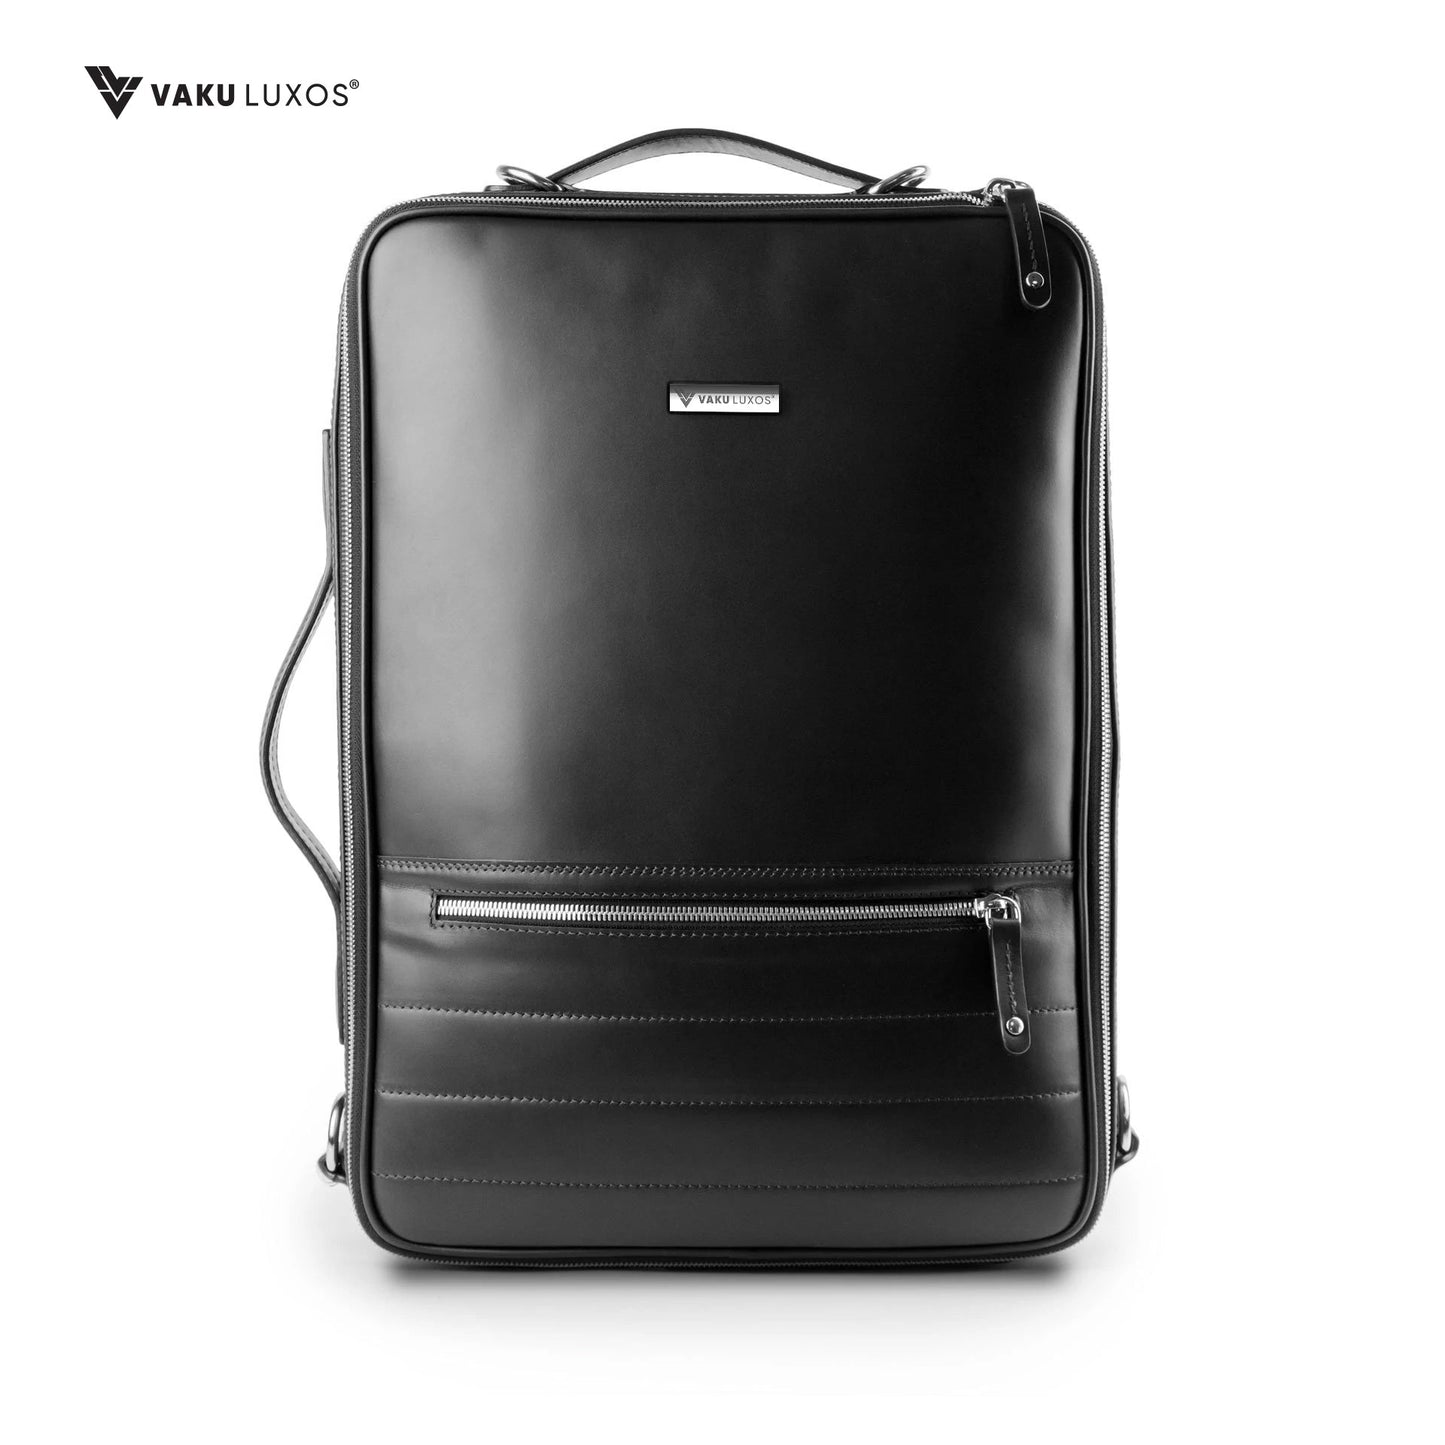 vaku-luxos®-barcelona-premium-collection-sleeve-for-macbook-13-14-with-strap-highly-durable-black8905129016777